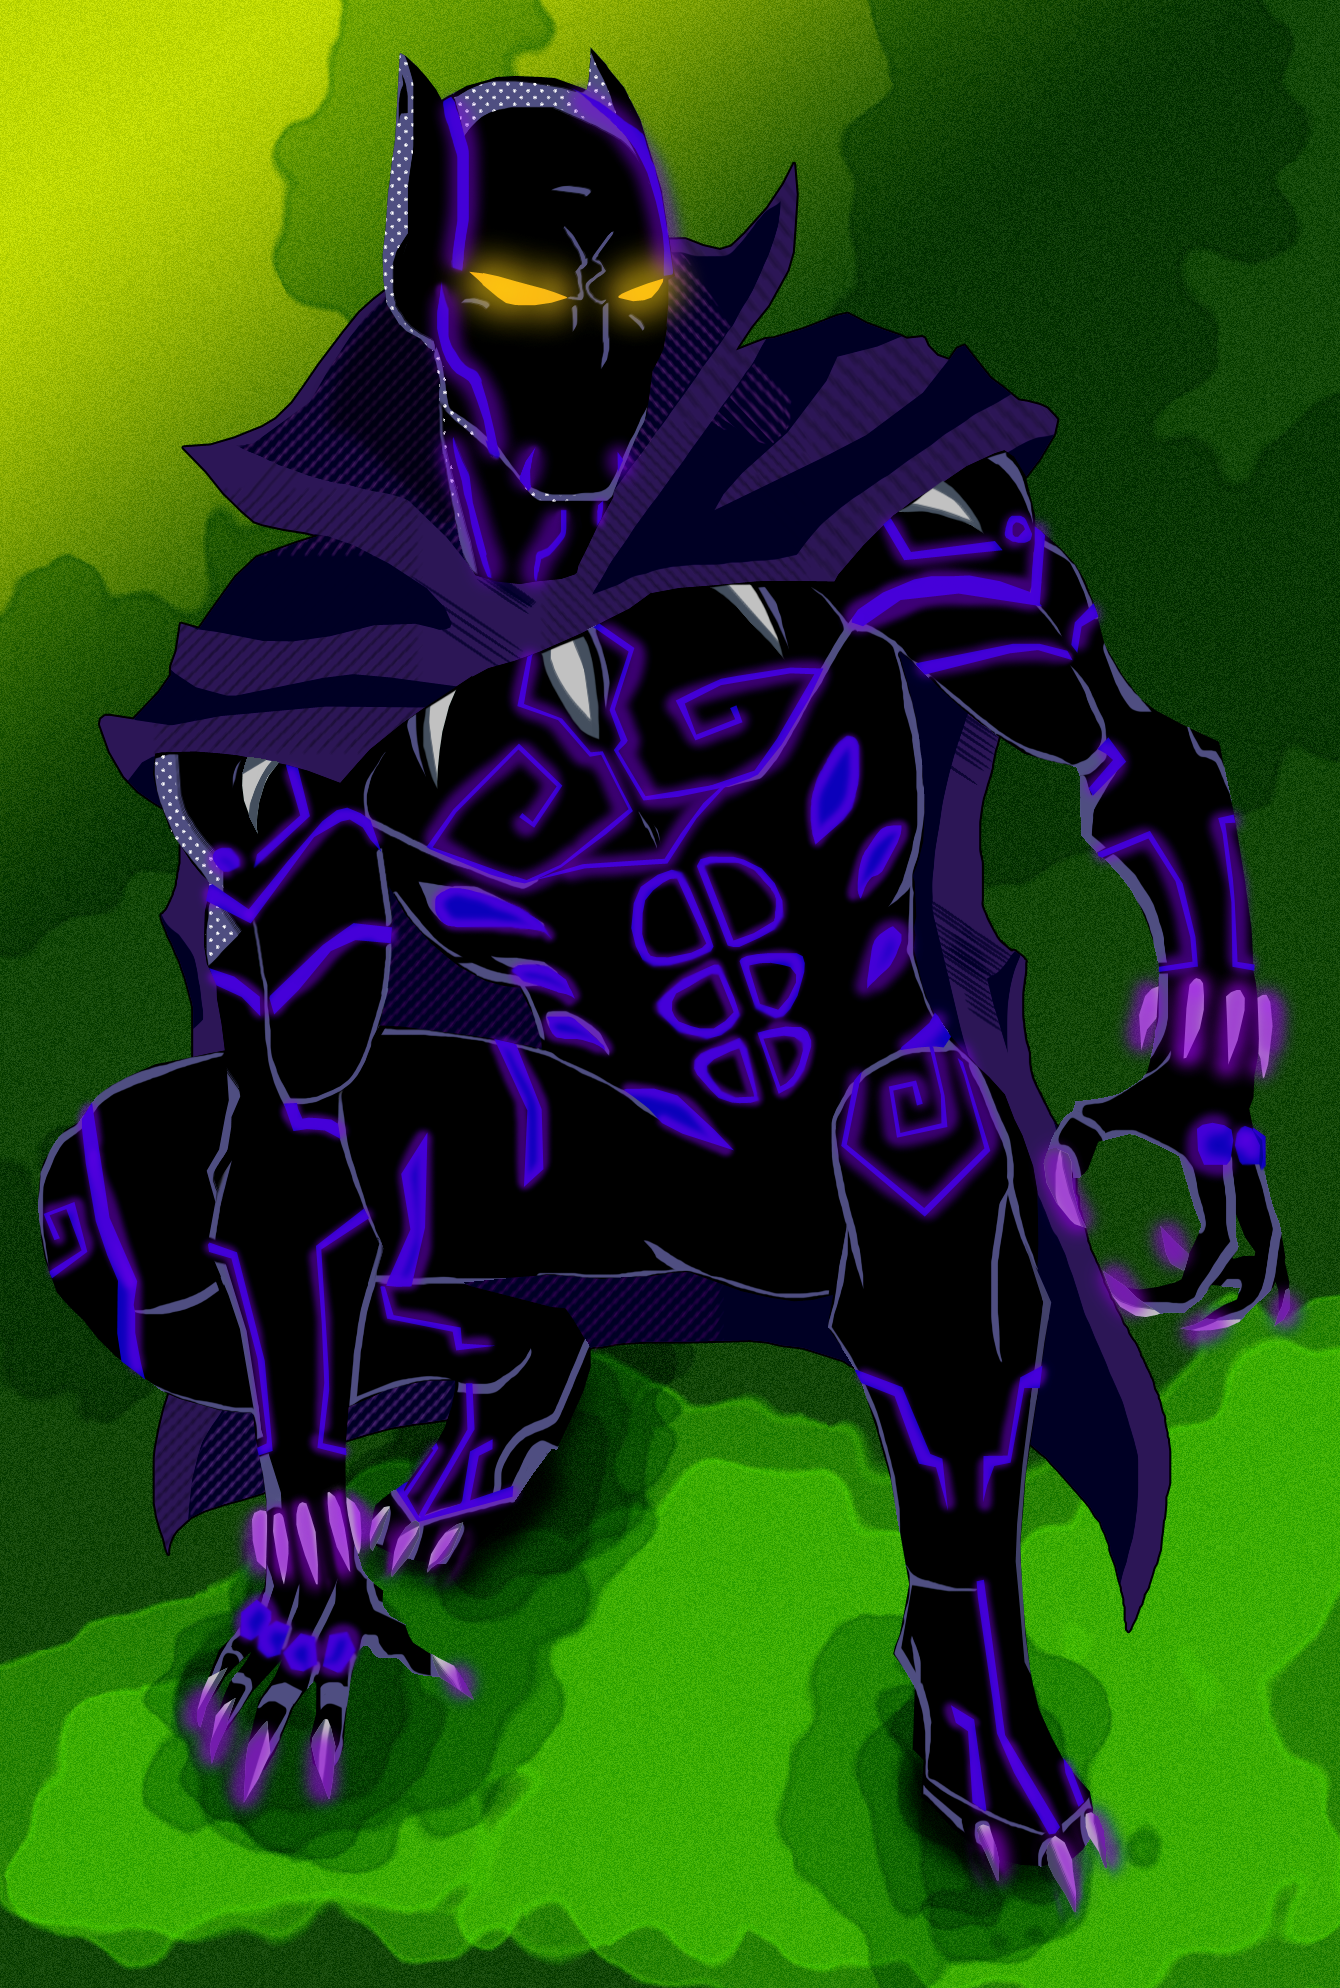 Black Panther- Animated style by Soyelmejor999 on DeviantArt